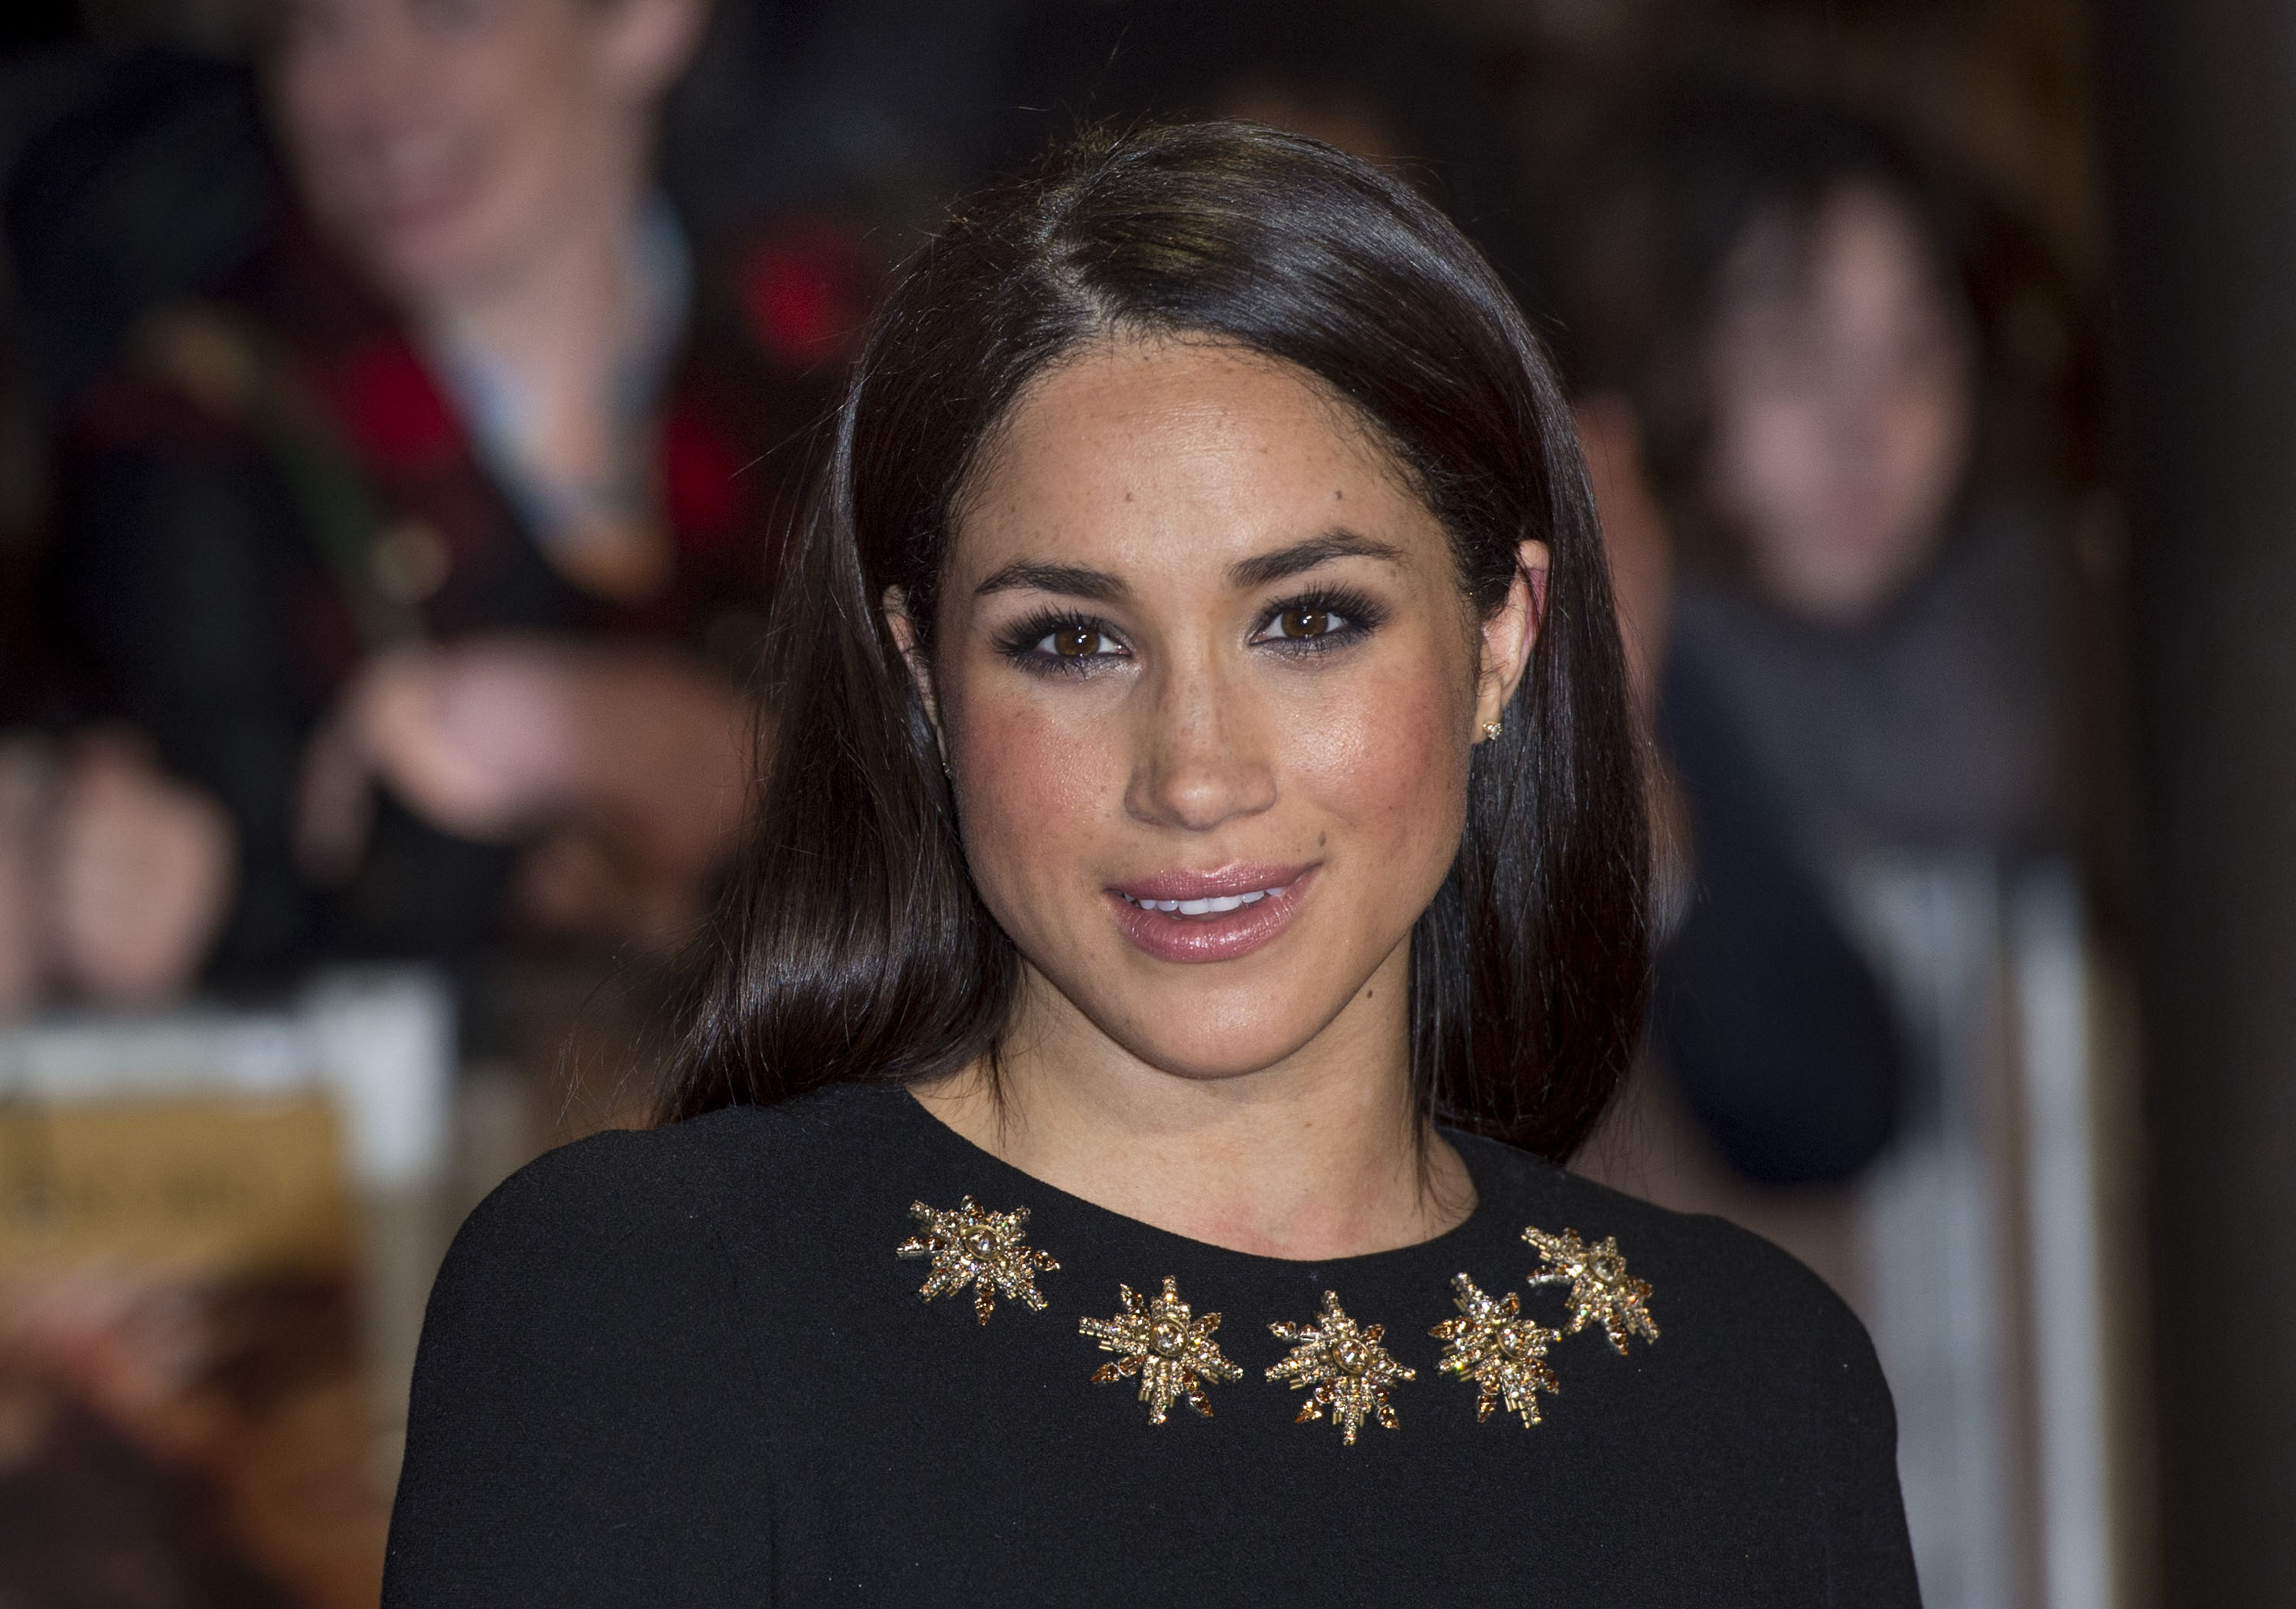 Meghan Markle attends the premiere of The Hunger Games: Catching Fire.